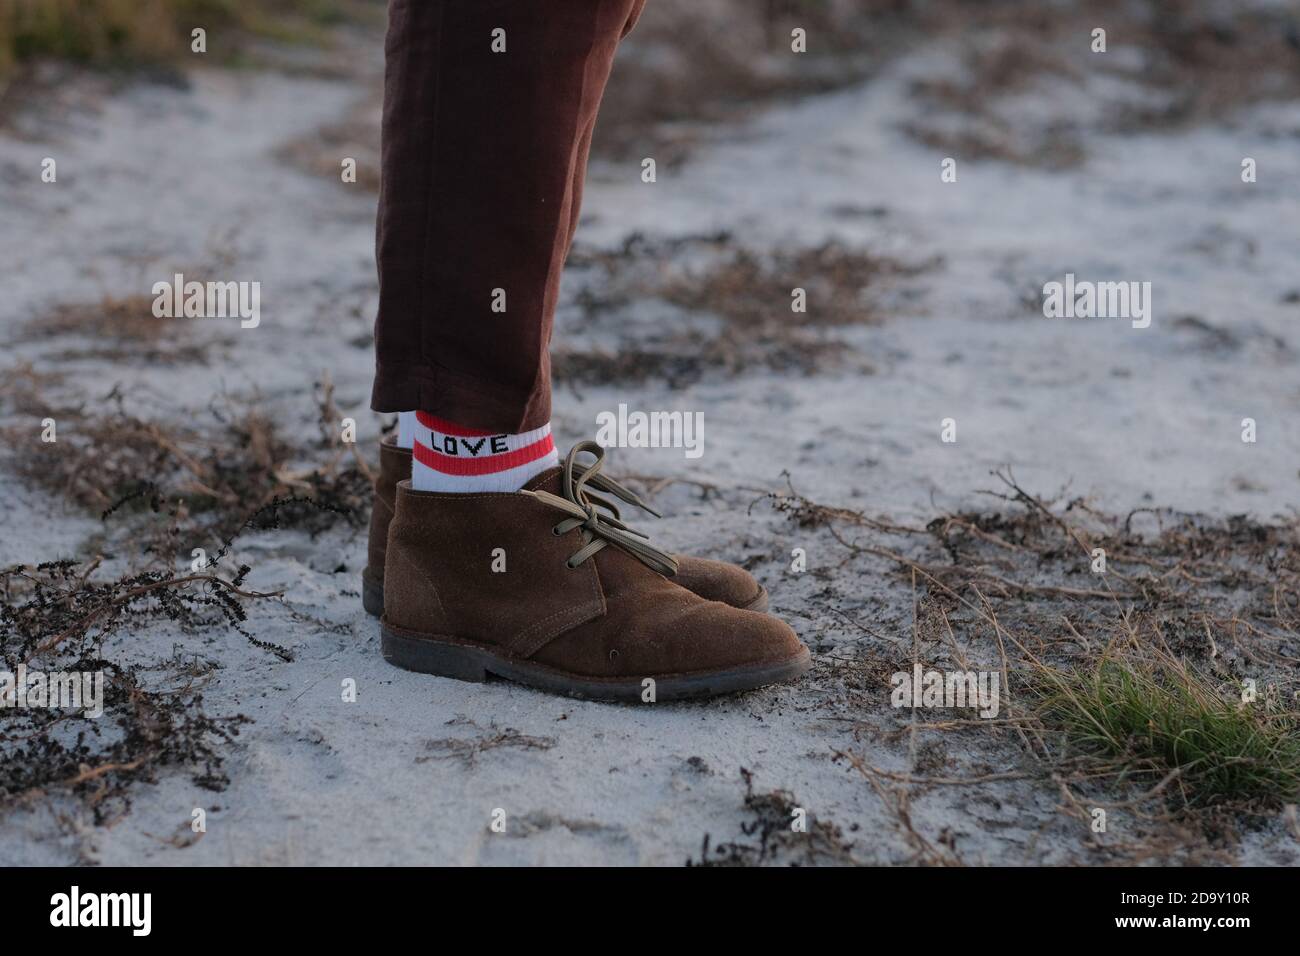 Shoes of man with socks in forest. Stock Photo